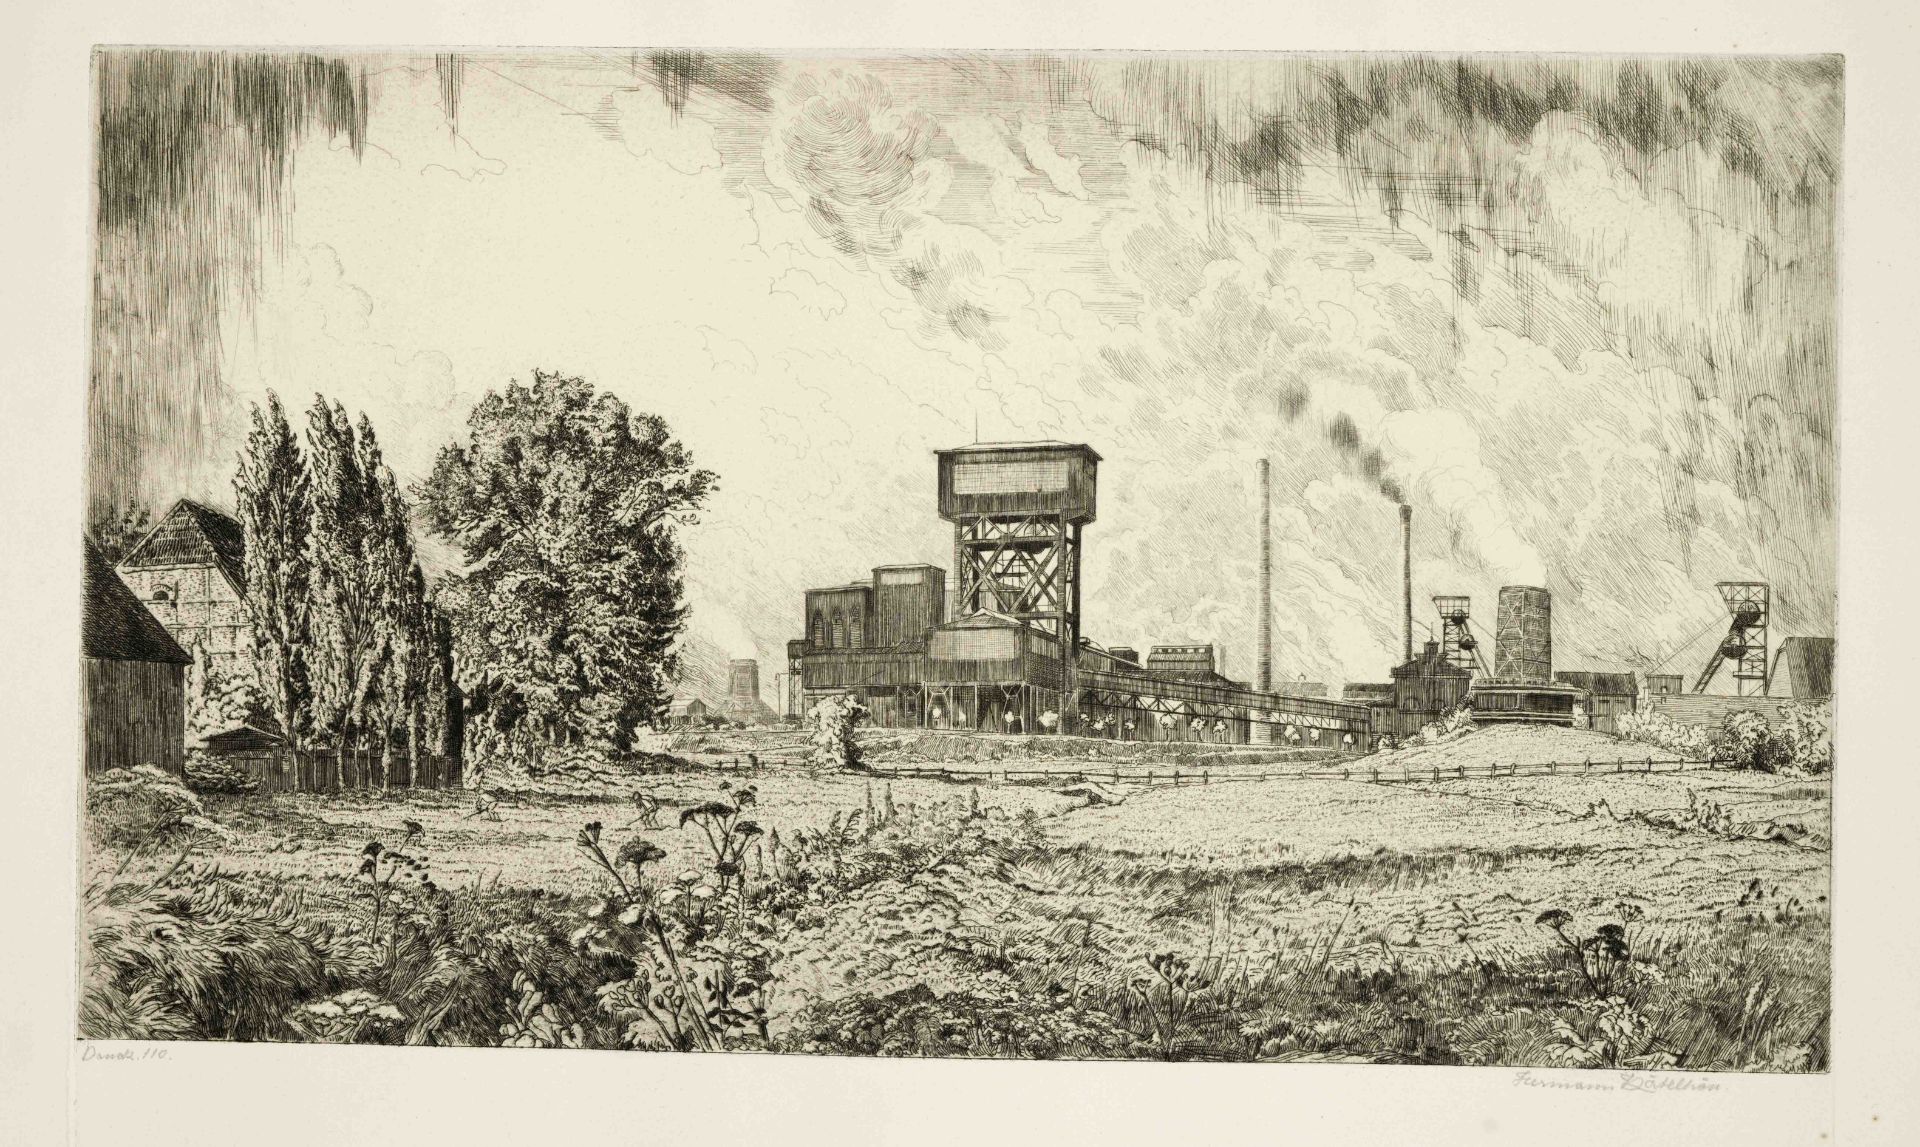 Hermann Kätelhön (1884-1940), bundle of 10 etchings and lithographs on the subject of industry and - Image 2 of 3